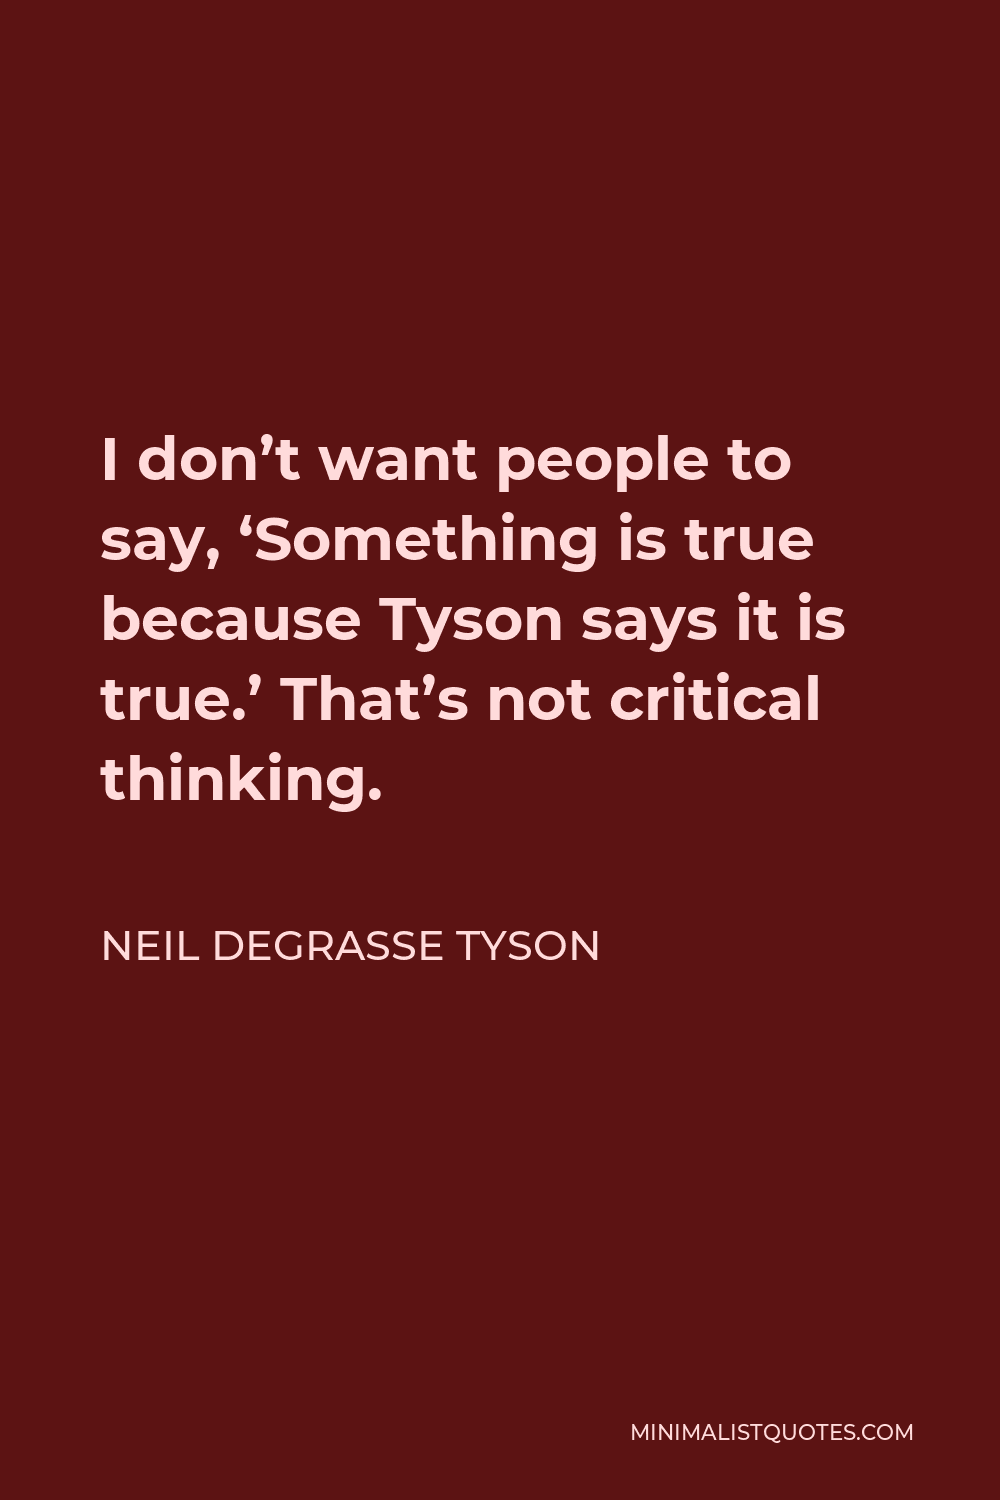 Neil deGrasse Tyson Quote - I don’t want people to say, ‘Something is true because Tyson says it is true.’ That’s not critical thinking.